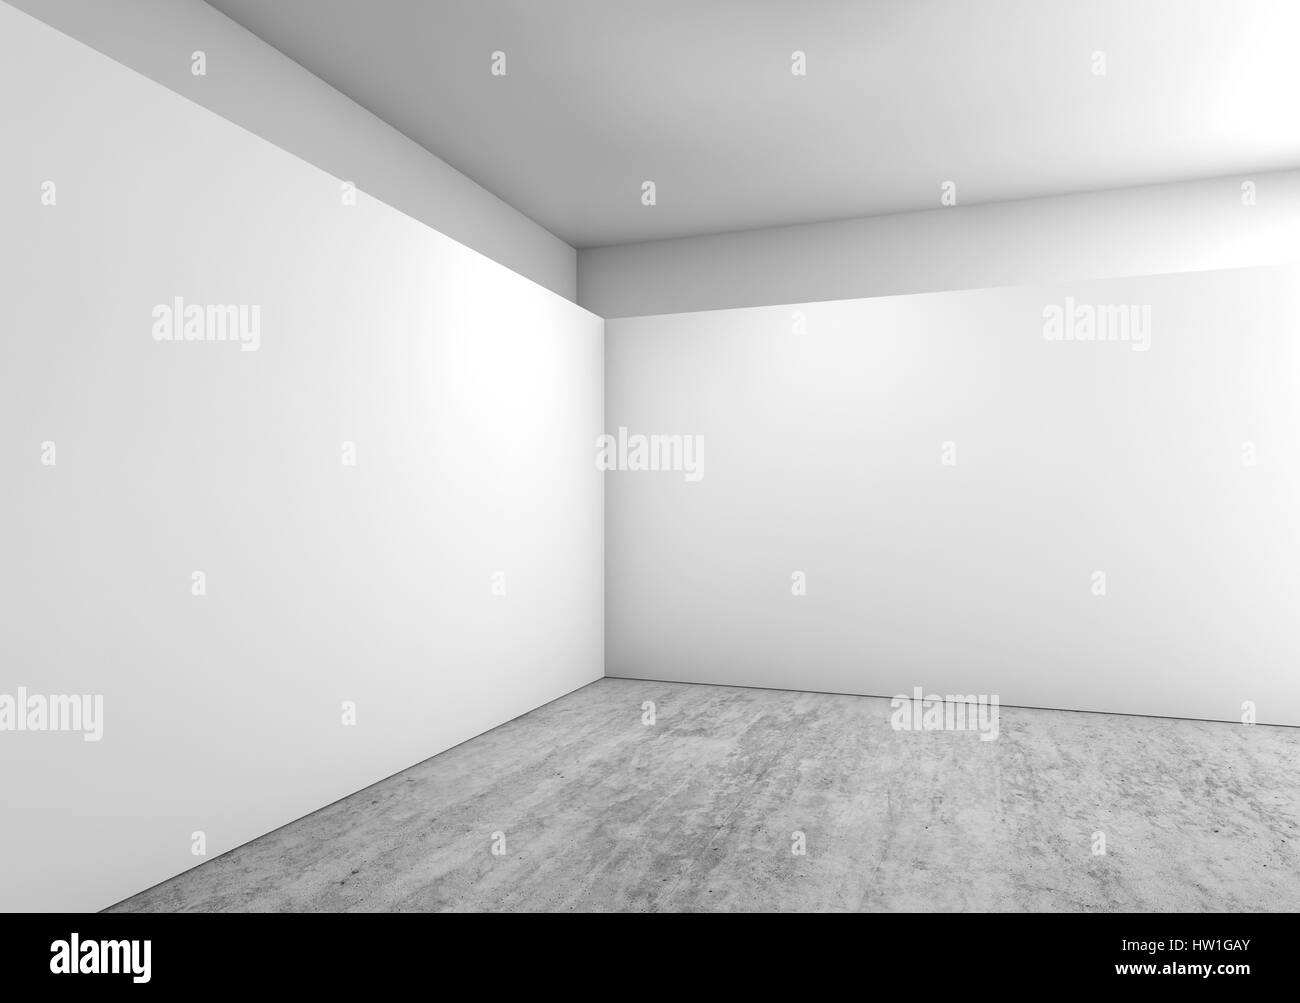 Abstract empty interior, white installation on concrete floor, contemporary architecture. 3d render illustration Stock Photo